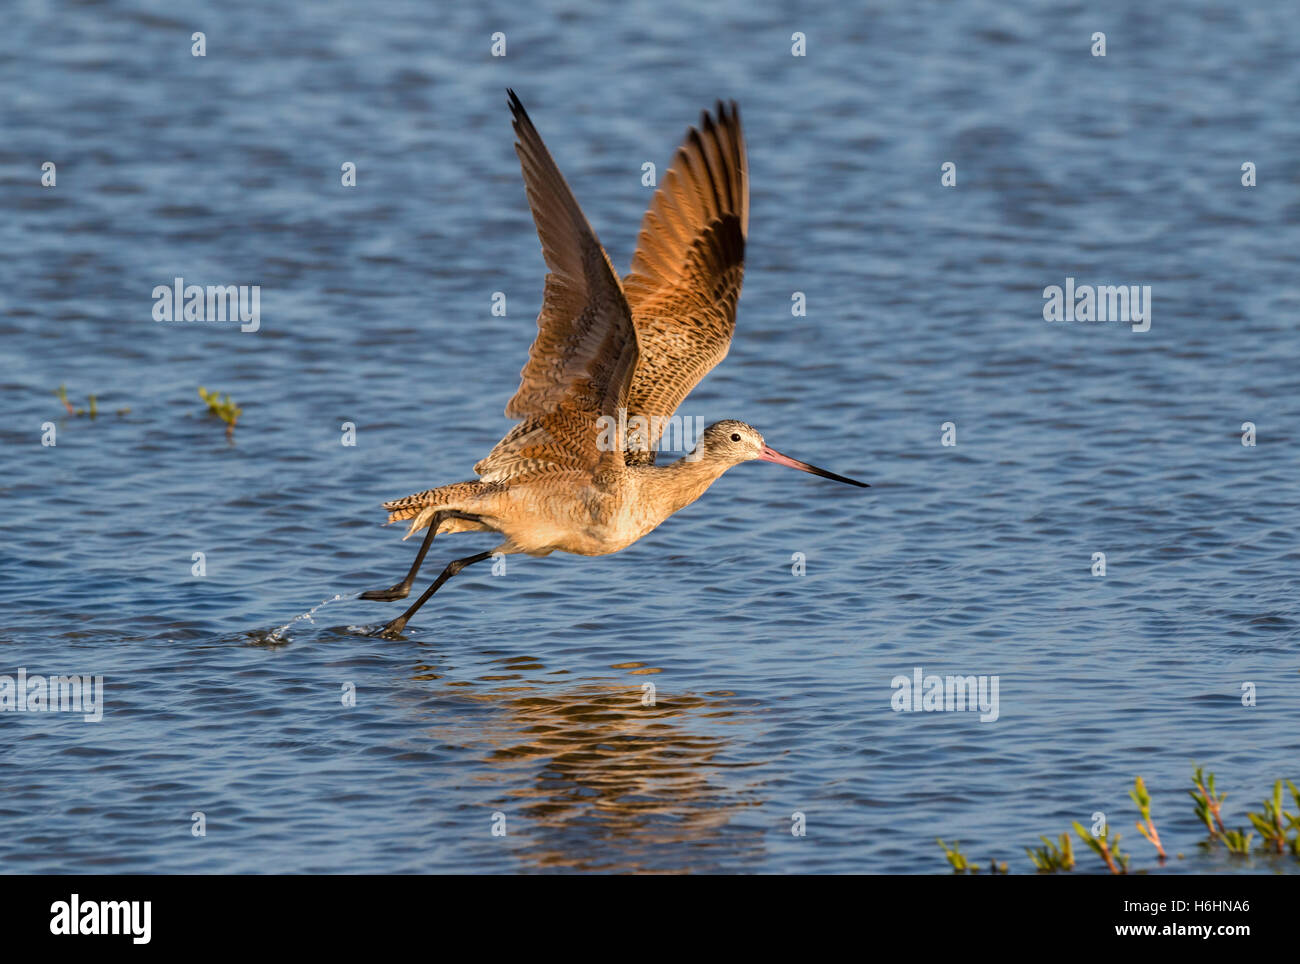 Marbled godwit (Limosa fedoa) taking off in the shallow water of tidal marsh, Galveston, Texas, USA Stock Photo